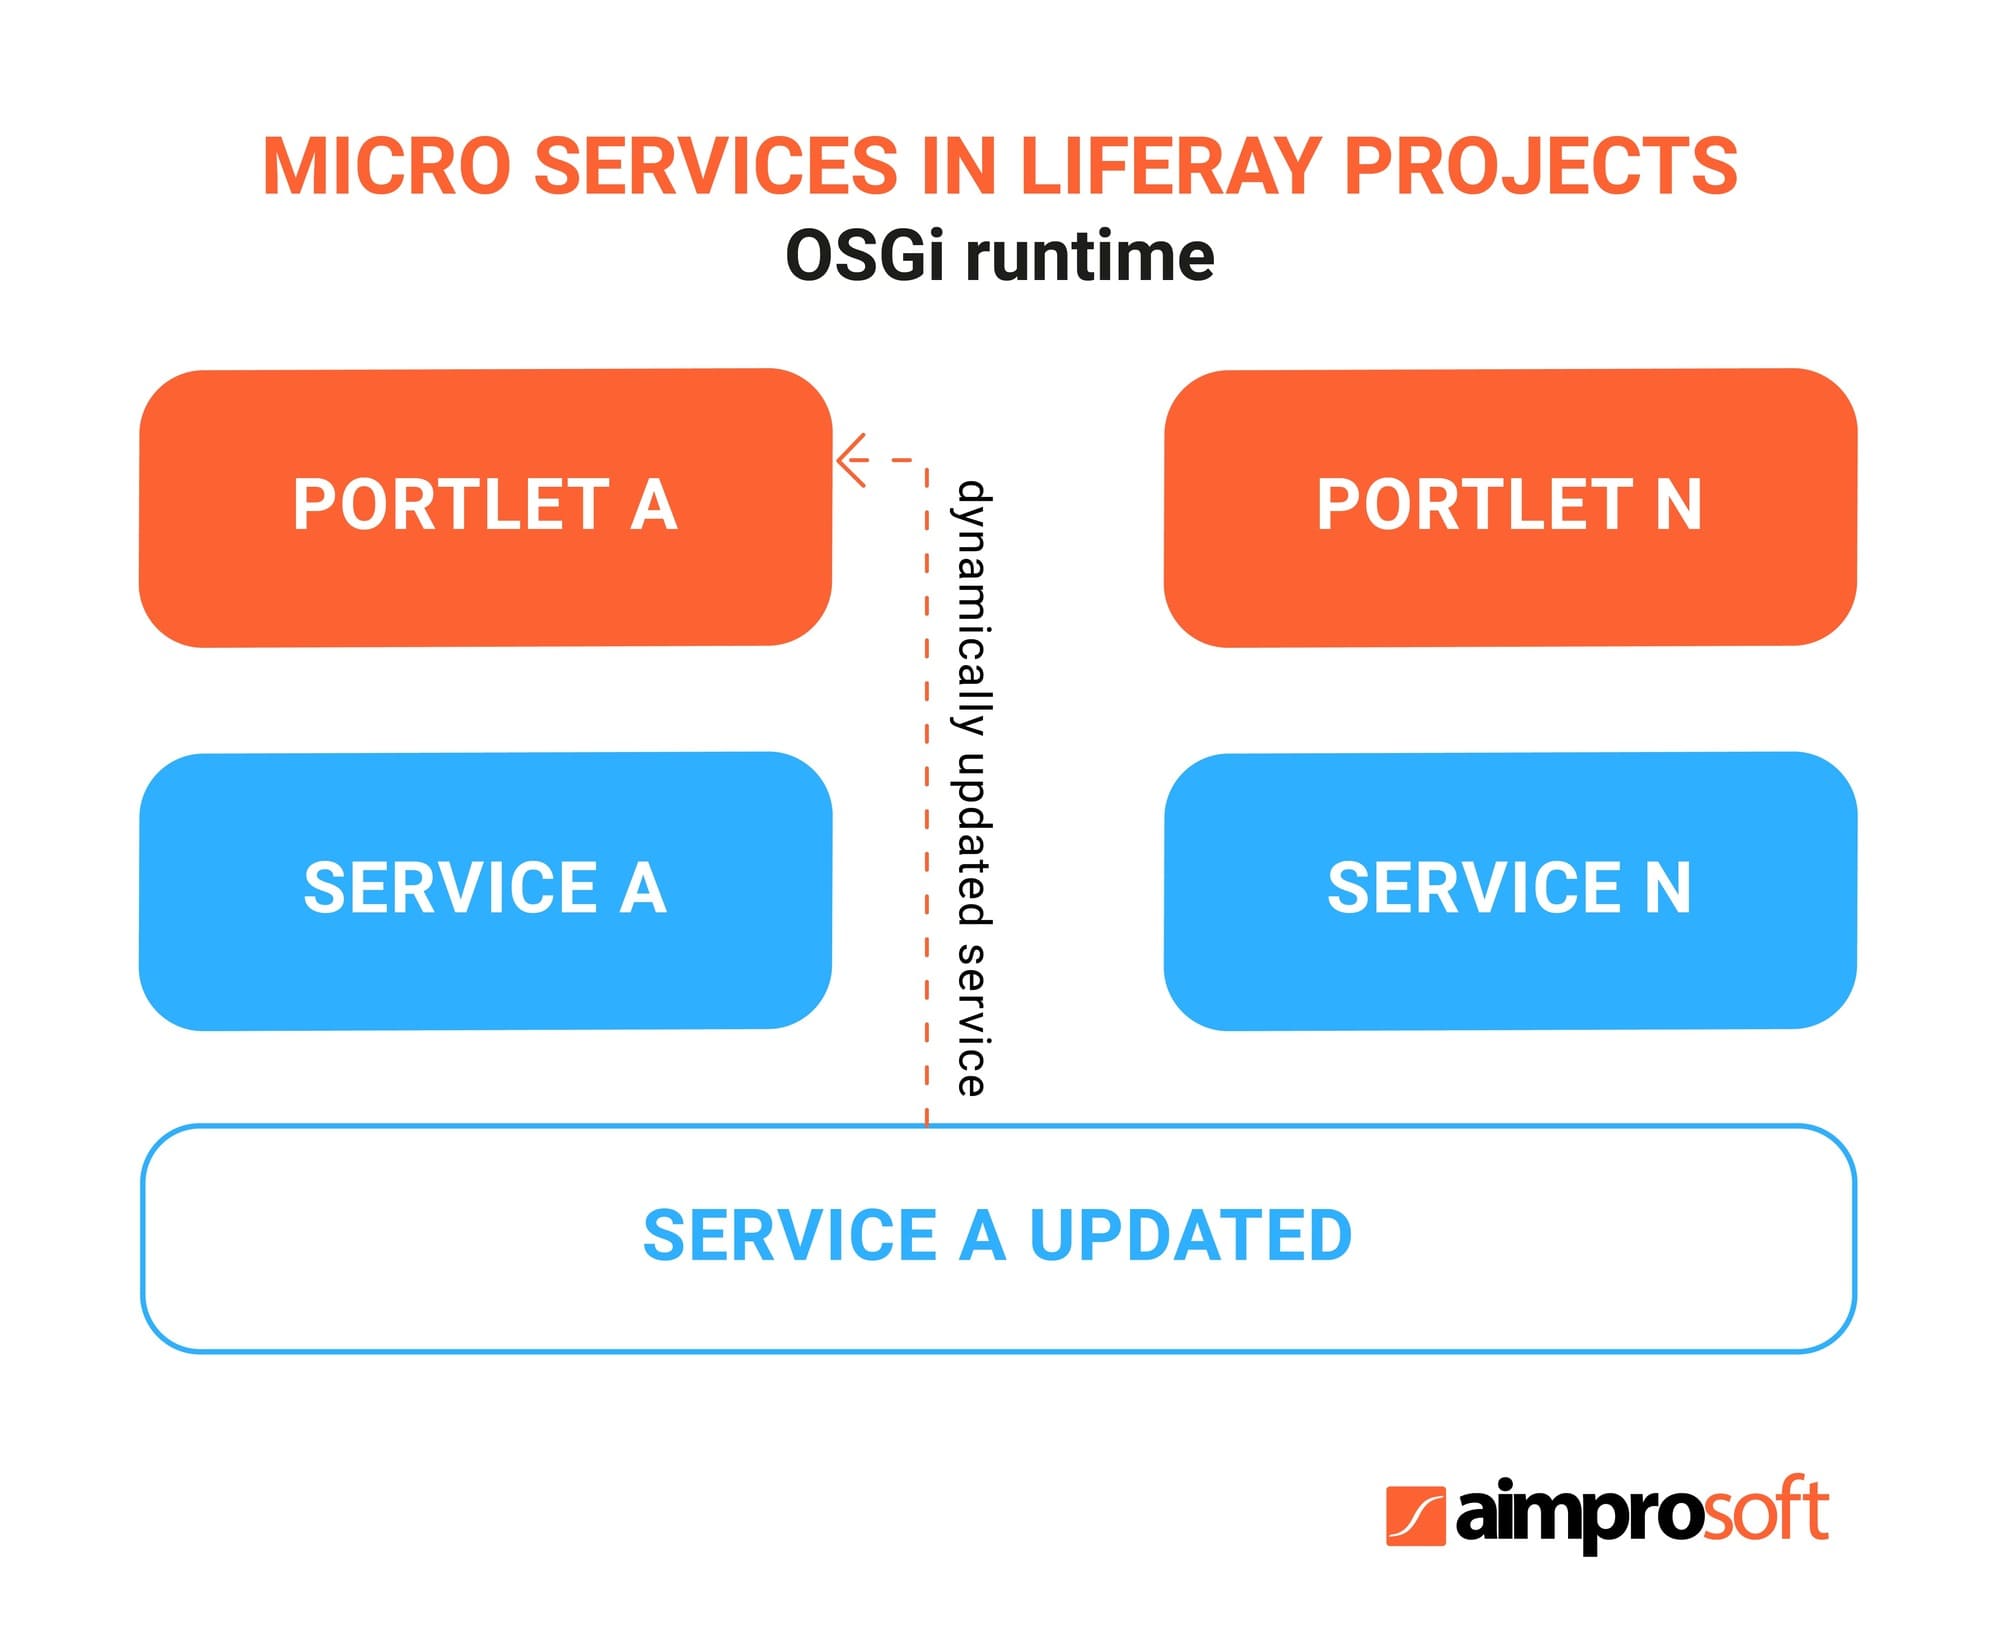 Microservice architecture in Liferay 7 projects